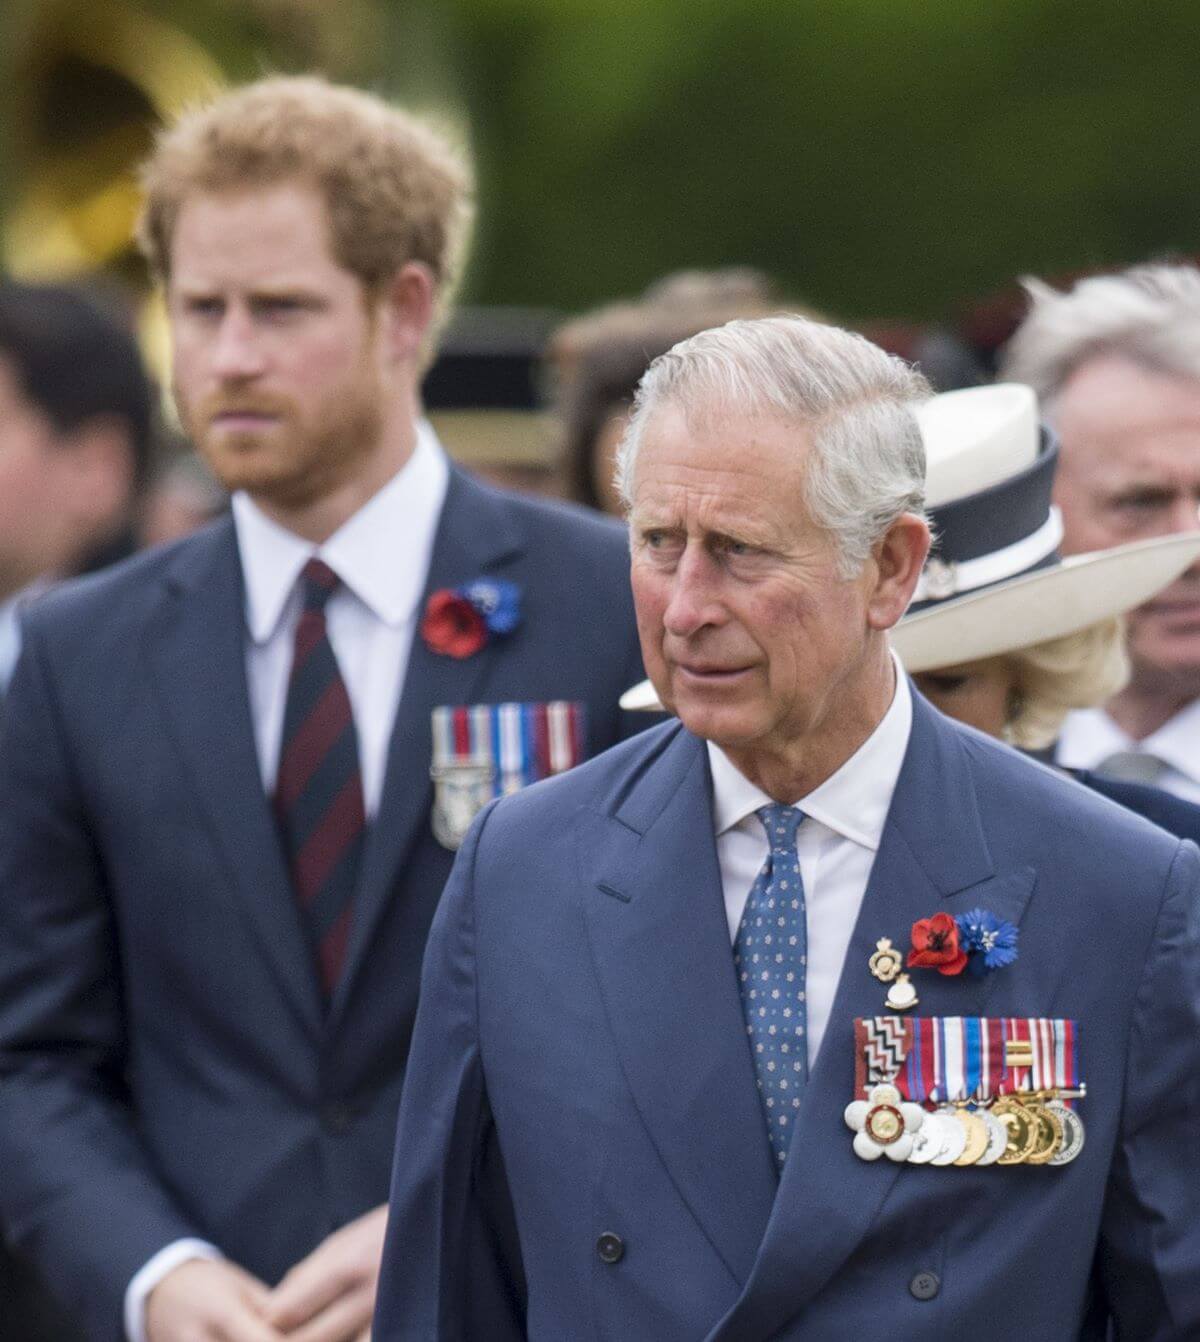 King Charles III and Prince Harry attend a Commemoration of the Centenary of the Battle of the Somme at The Commonwealth War Graves Commission Thiepval Memorial